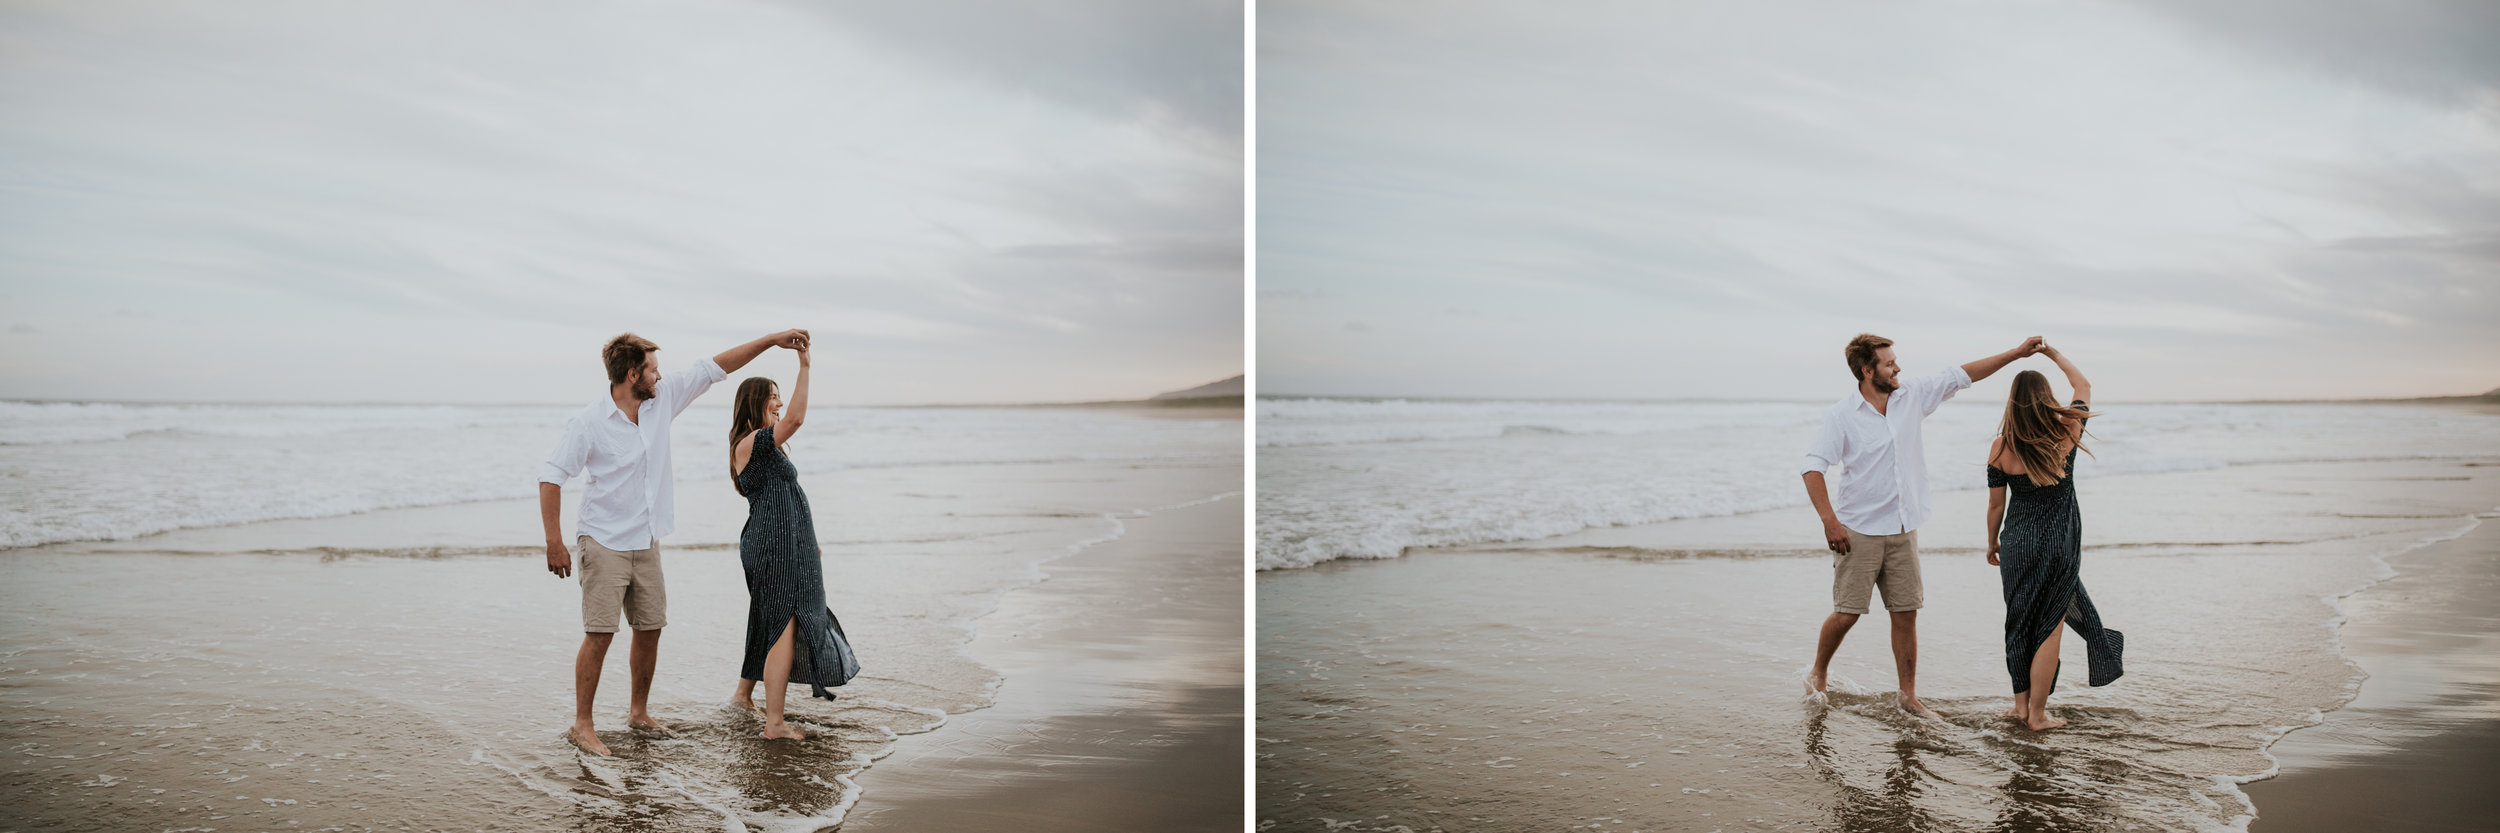 AMY+ANDREW+SHOALHAVEN+HEADS+BEACH+MATERNITY+SESSION+RELAXED-4.jpg